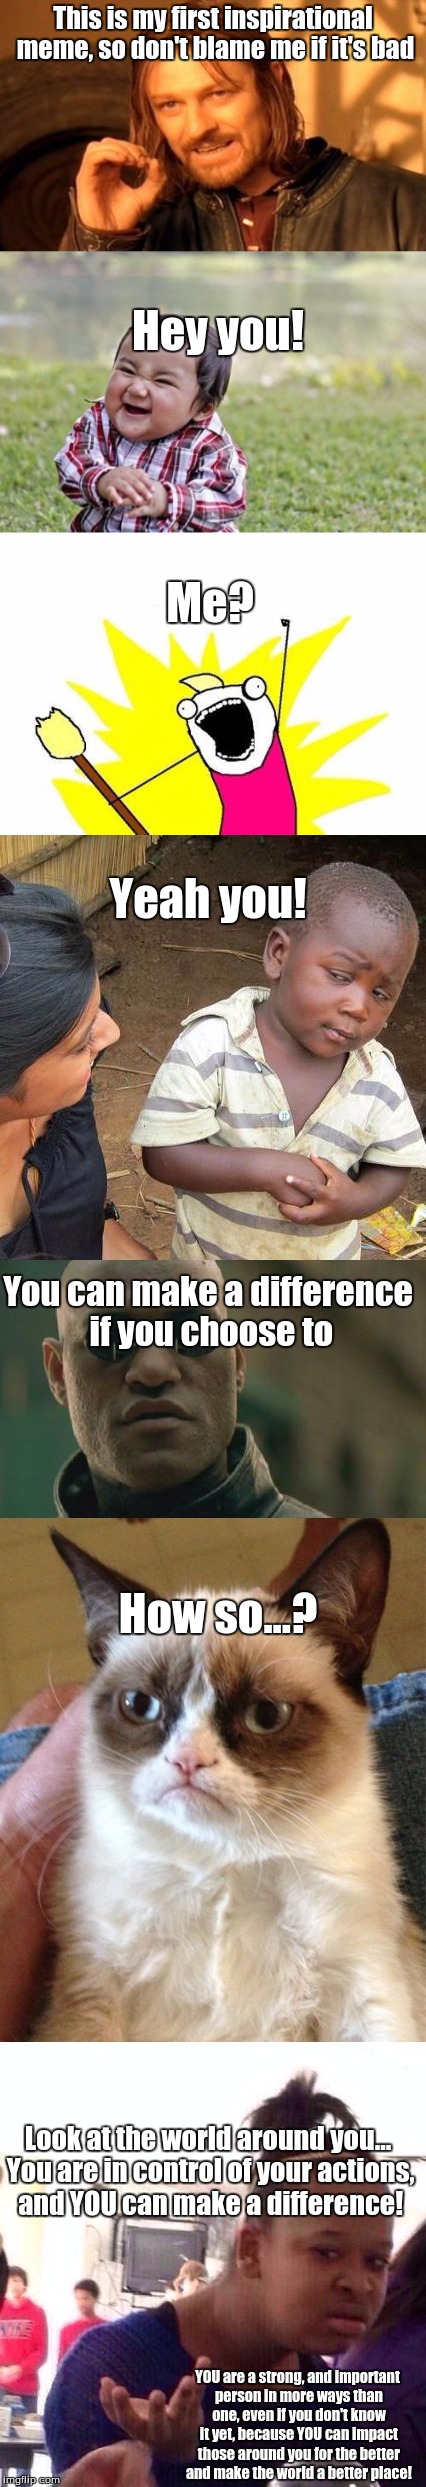 My first Inspirational meme | This is my first inspirational meme, so don't blame me if it's bad; Hey you! Me? Yeah you! You can make a difference if you choose to; How so...? Look at the world around you... You are in control of your actions, and YOU can make a difference! YOU are a strong, and important person in more ways than one, even if you don't know it yet, because YOU can impact those around you for the better and make the world a better place! | image tagged in inspirational memes,memes,good | made w/ Imgflip meme maker